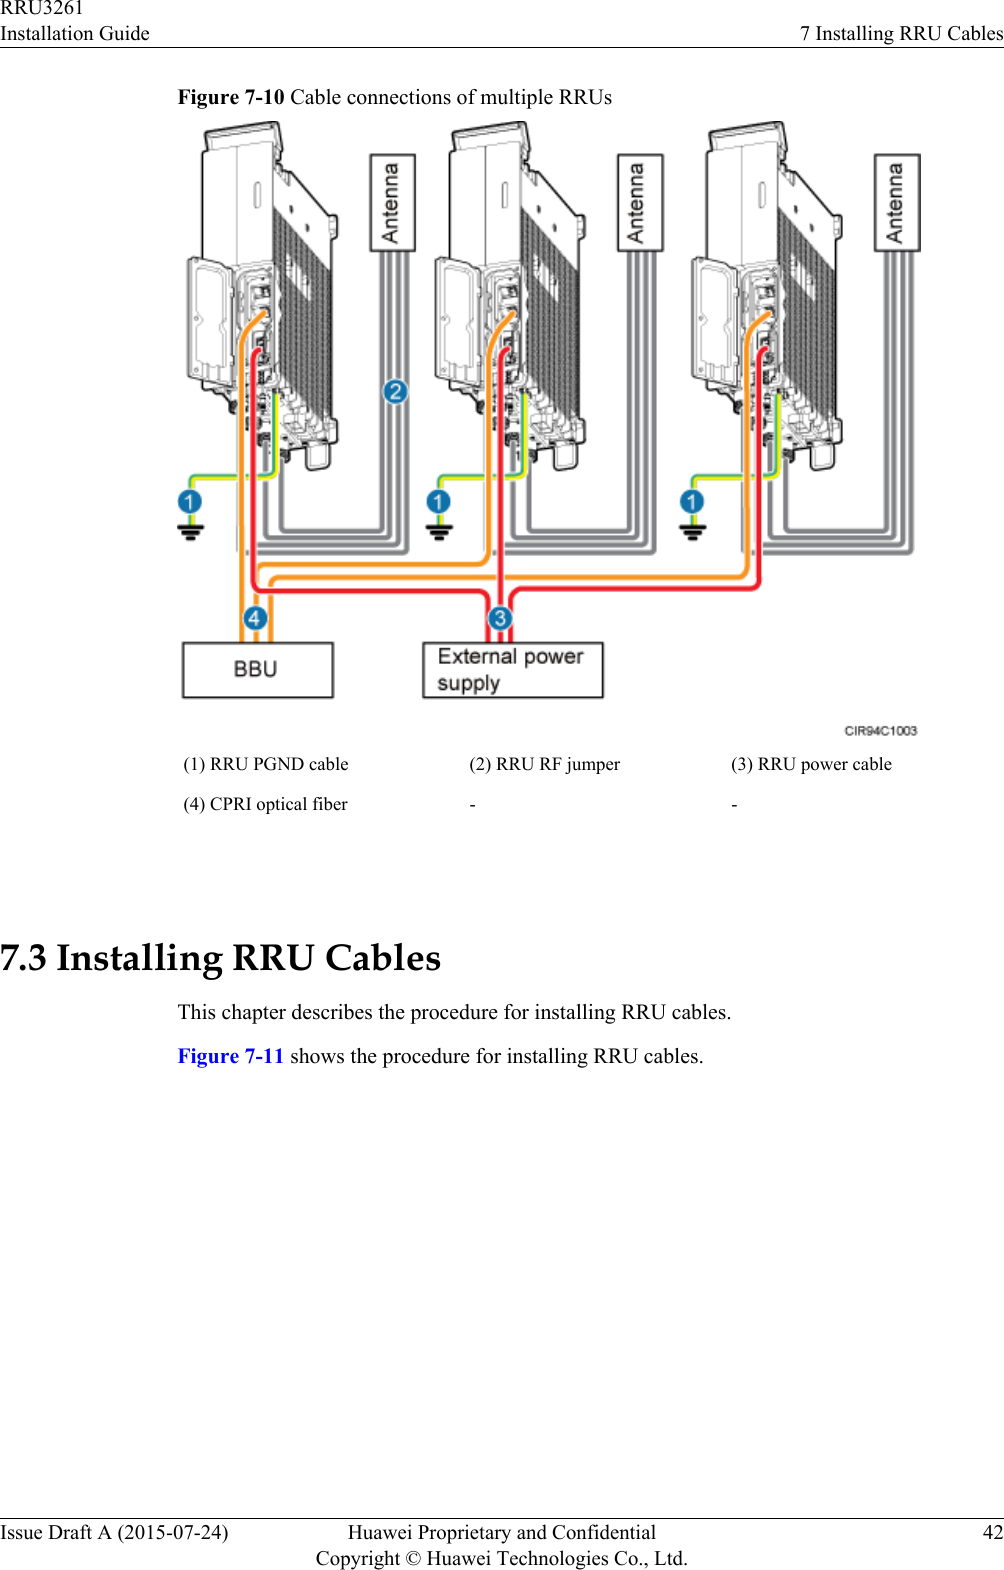 Figure 7-10 Cable connections of multiple RRUs(1) RRU PGND cable (2) RRU RF jumper (3) RRU power cable(4) CPRI optical fiber - - 7.3 Installing RRU CablesThis chapter describes the procedure for installing RRU cables.Figure 7-11 shows the procedure for installing RRU cables.RRU3261Installation Guide 7 Installing RRU CablesIssue Draft A (2015-07-24) Huawei Proprietary and ConfidentialCopyright © Huawei Technologies Co., Ltd.42